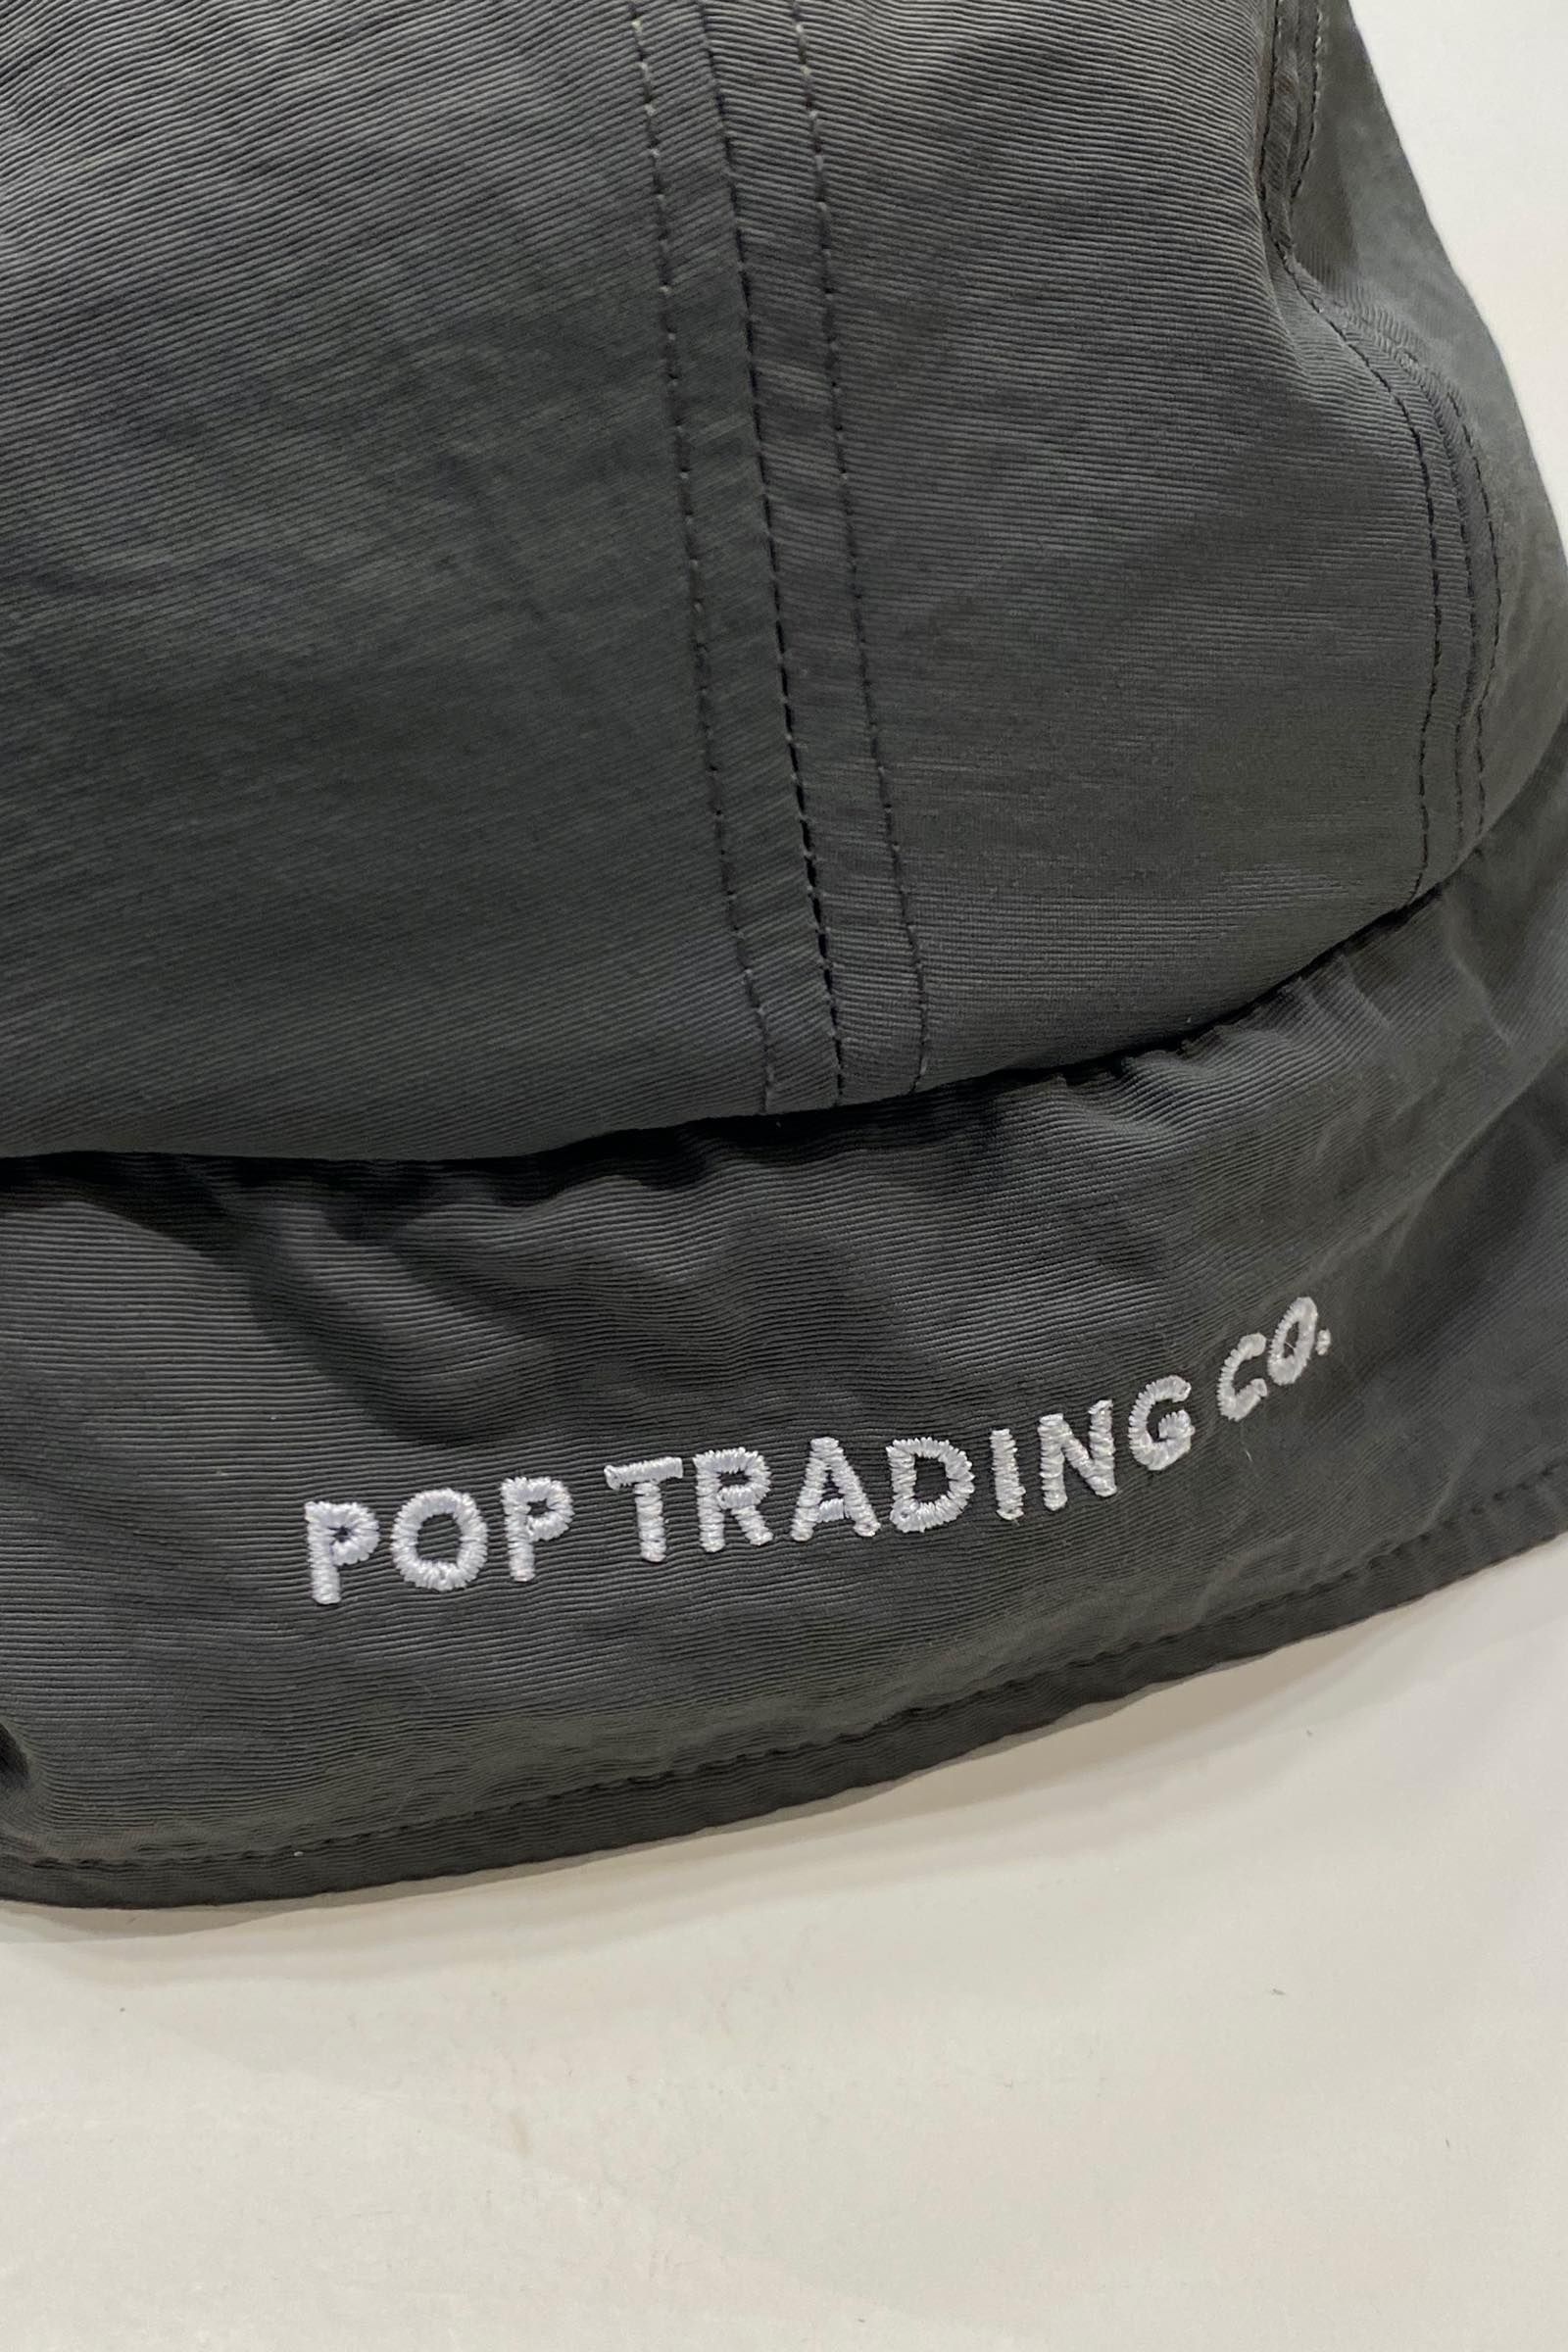 Pop Trading Company - earflap 5panel hat 21aw | asterisk